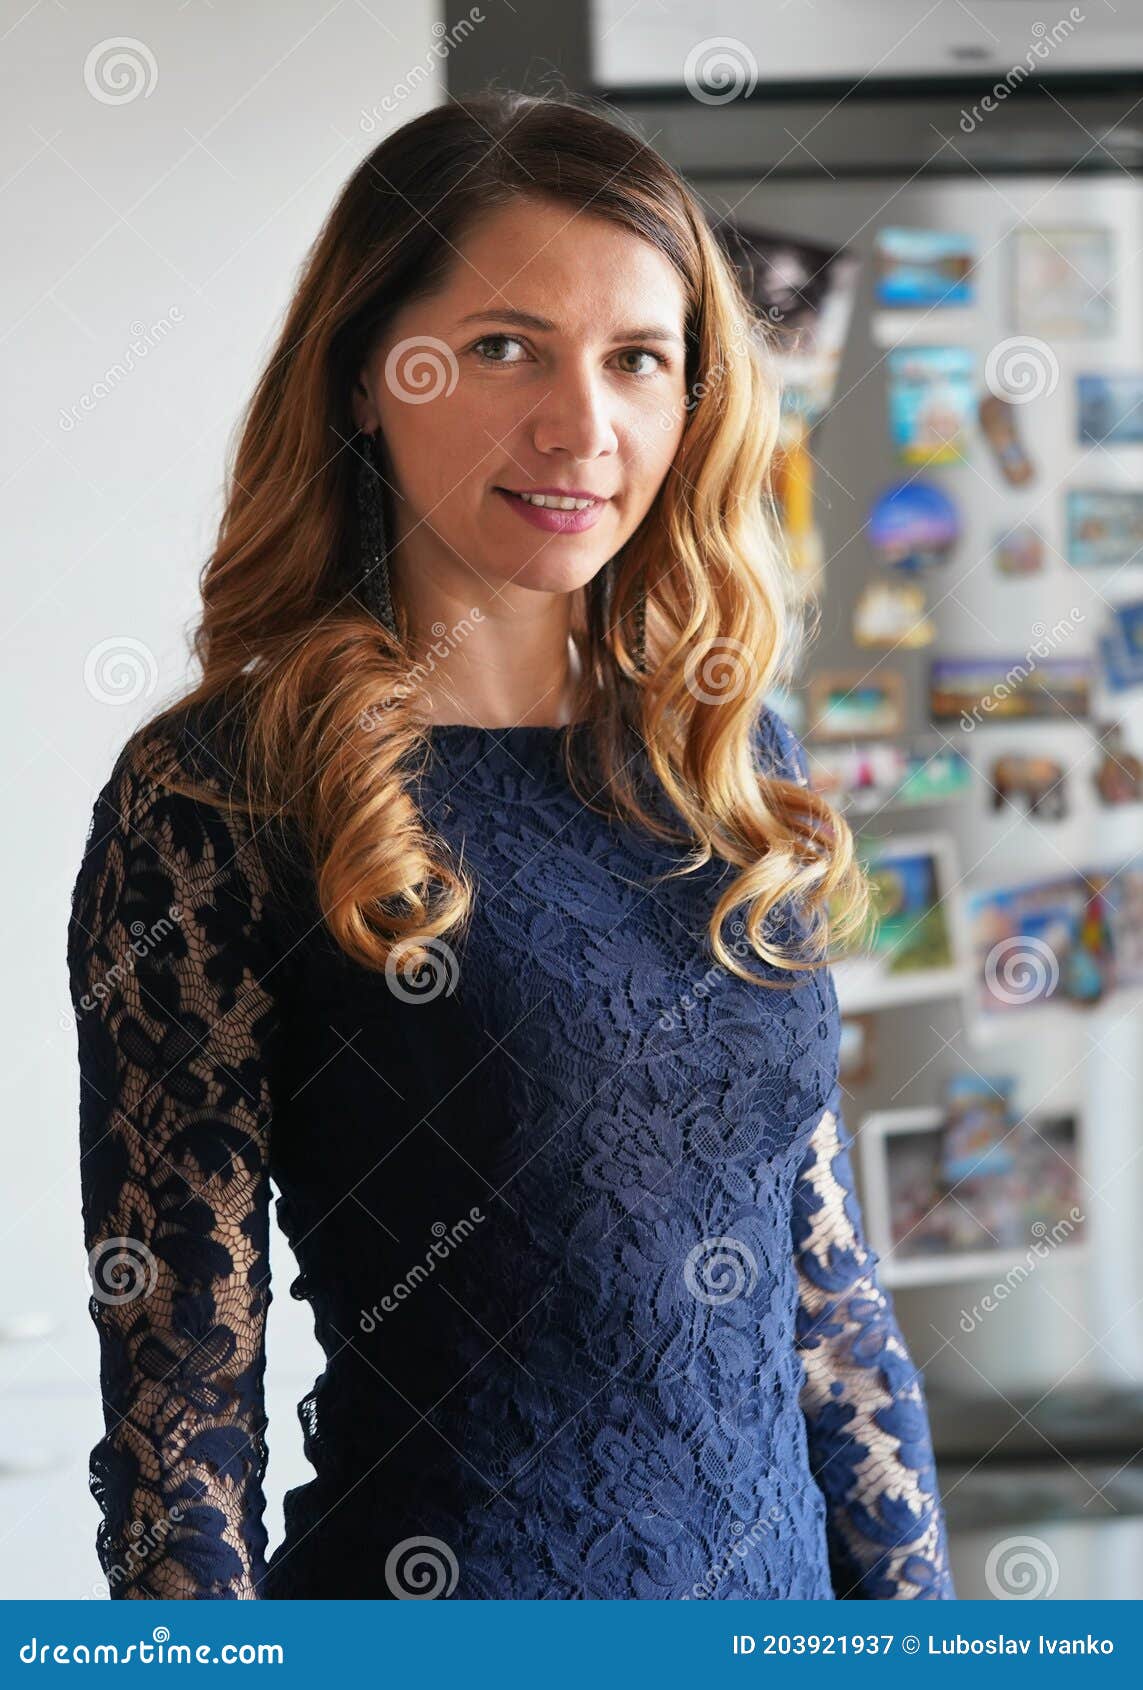 Natural Light Portrait of Young Woman with Long Waves Hair, Wearing Dark  Blue Dress, Blurred Steel Fridge Background Stock Image - Image of adult,  beautiful: 203921937